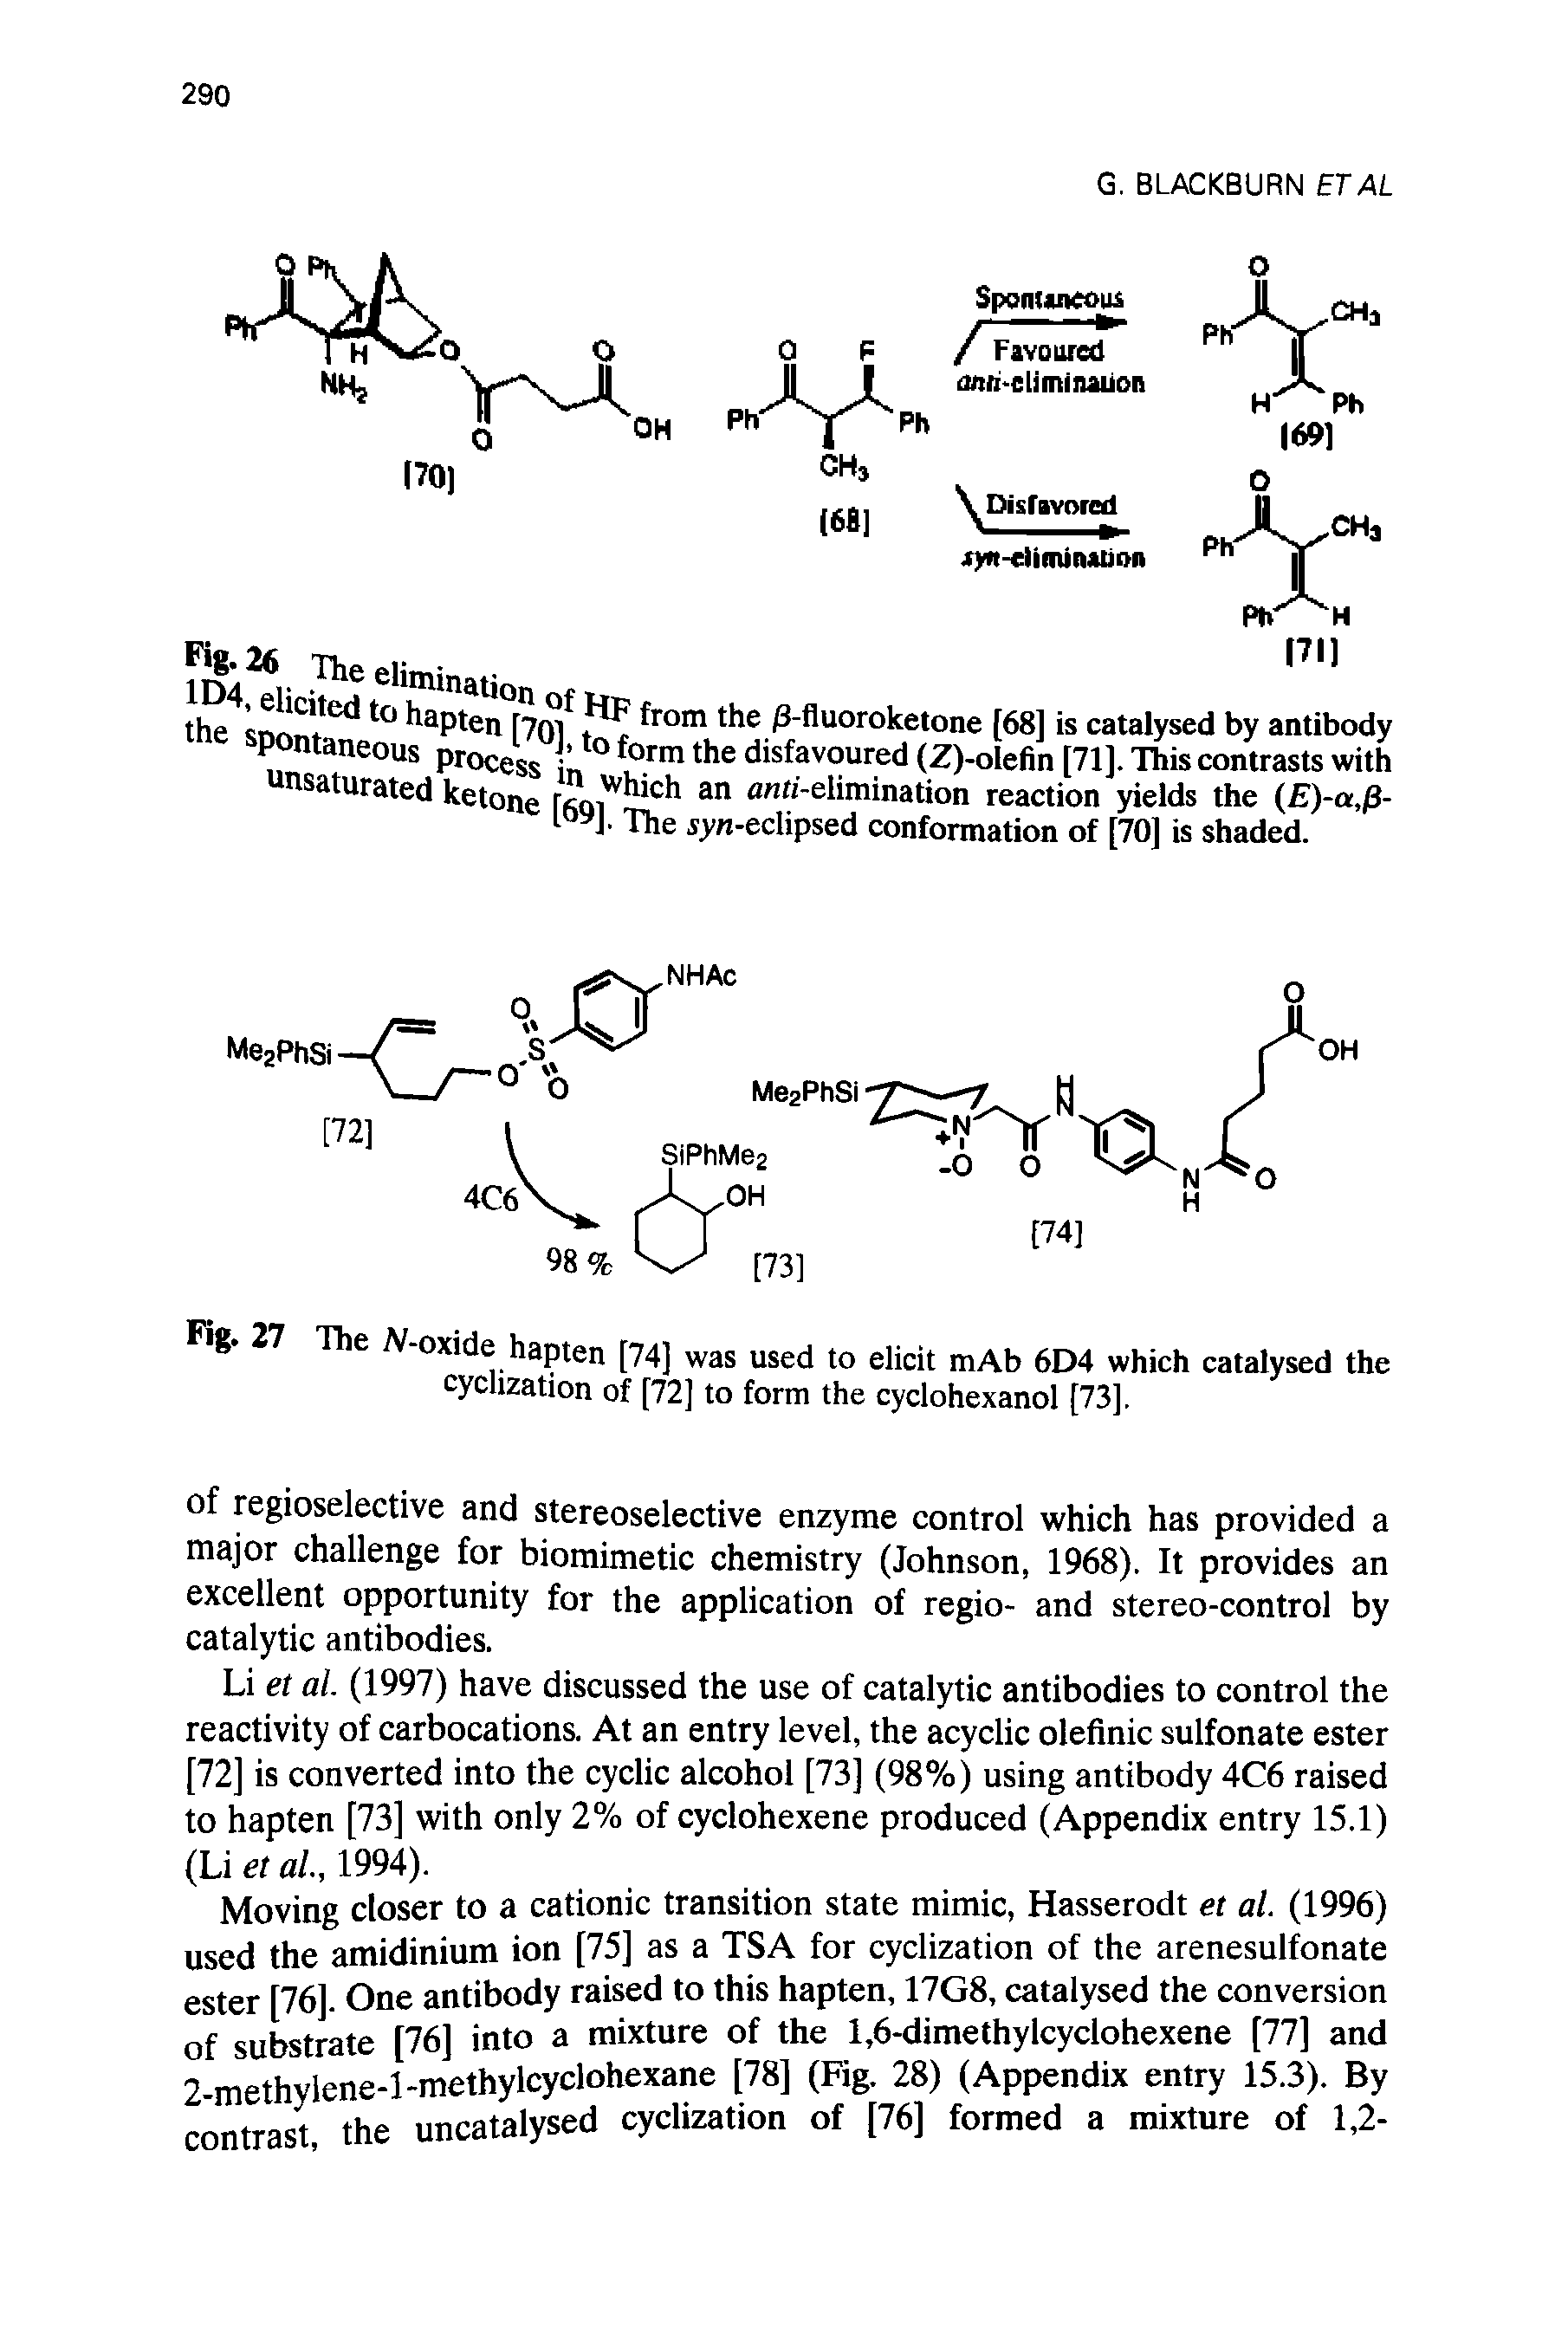 Fig. 27 The N-oxide hapten [74] was used to elicit mAb 6D4 which catalysed the cyclization of [72] to form the cyclohexanol [73],...